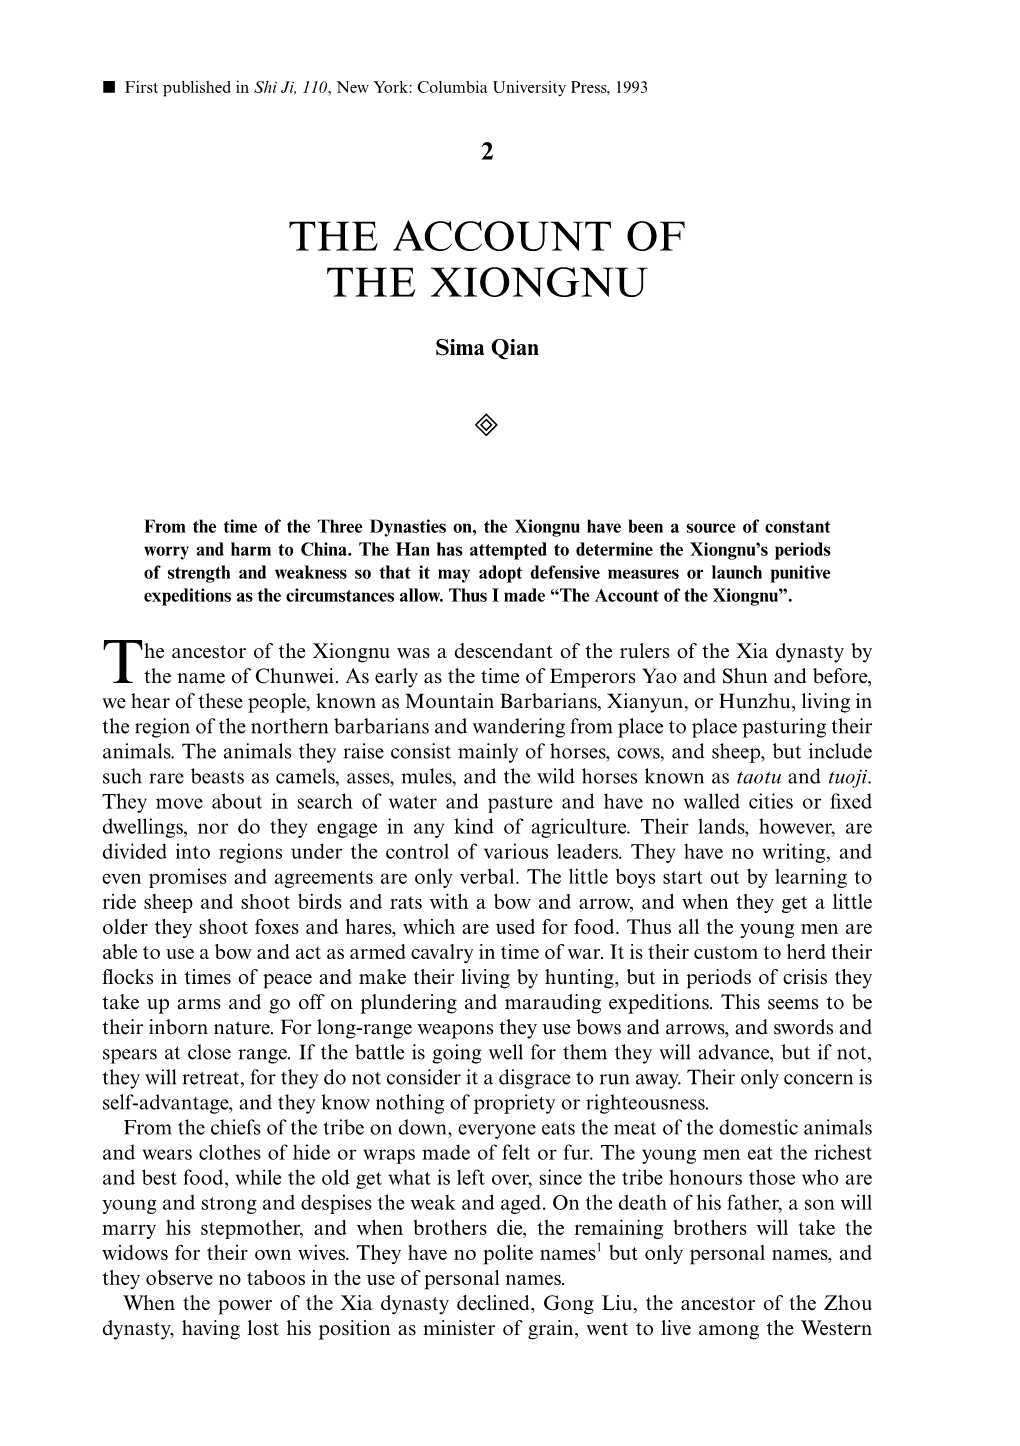 The Account of the Xiongnu